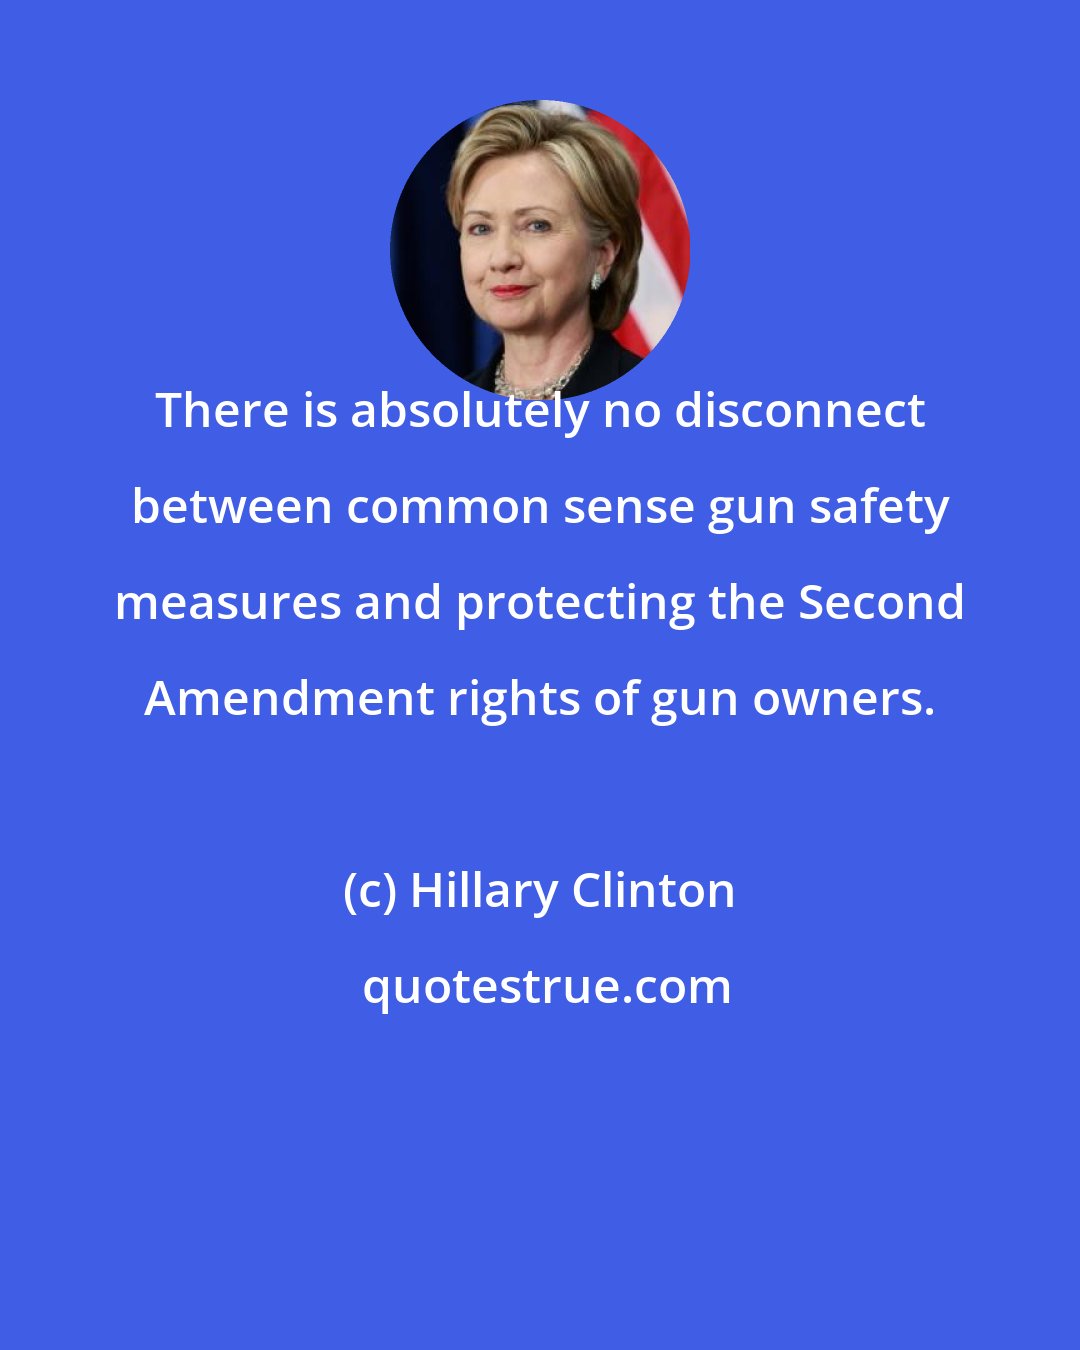 Hillary Clinton: There is absolutely no disconnect between common sense gun safety measures and protecting the Second Amendment rights of gun owners.